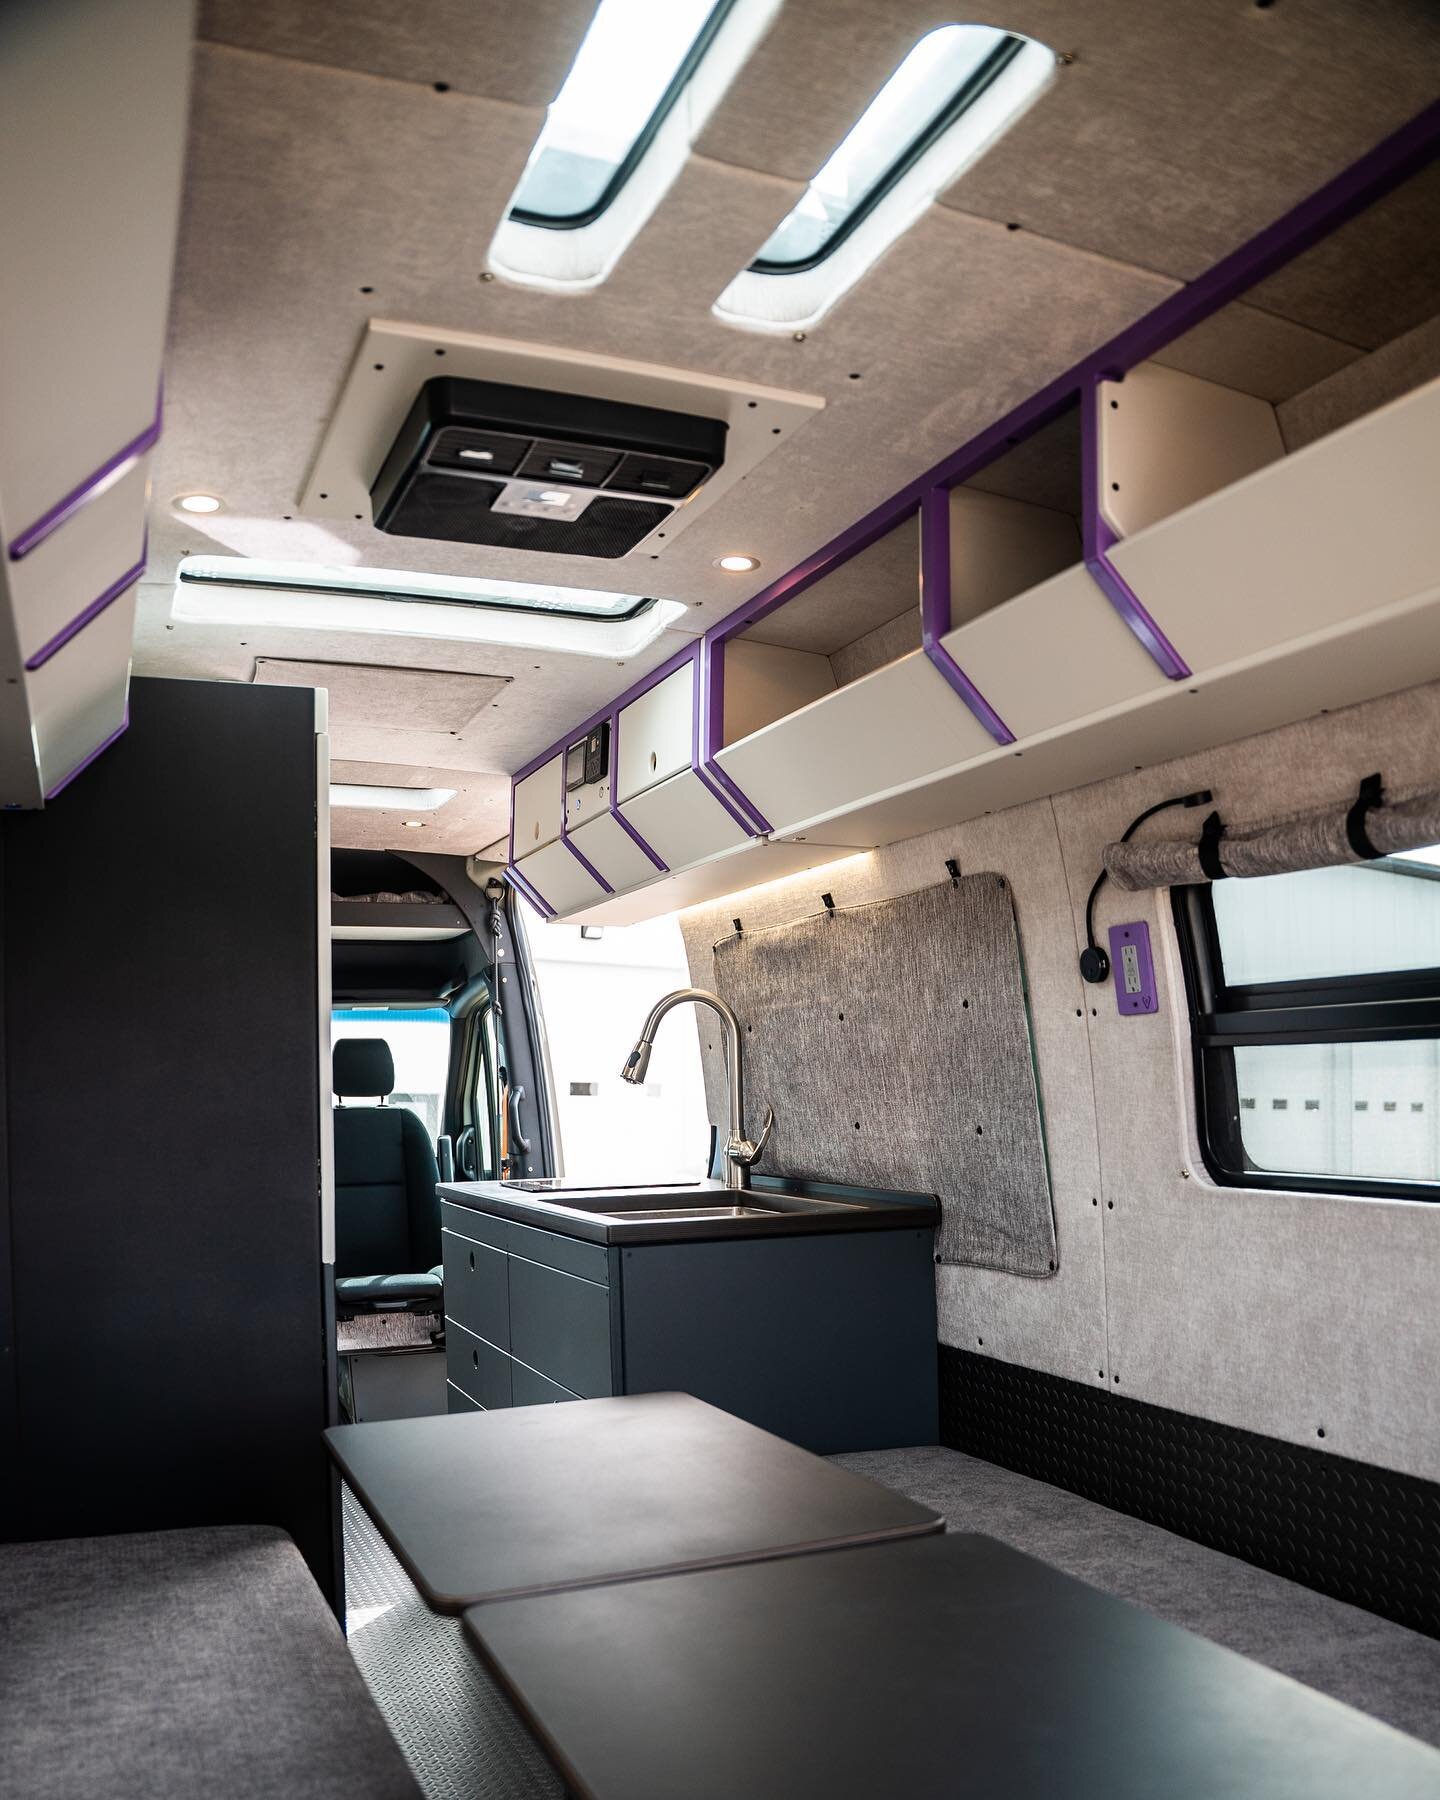 The 170EXT platform gives you an expansive space to create a conversion perfectly suited to your adventures. How would you configure this van to best suit your travels? 

#ruggedliberation 
📸: @tenimon